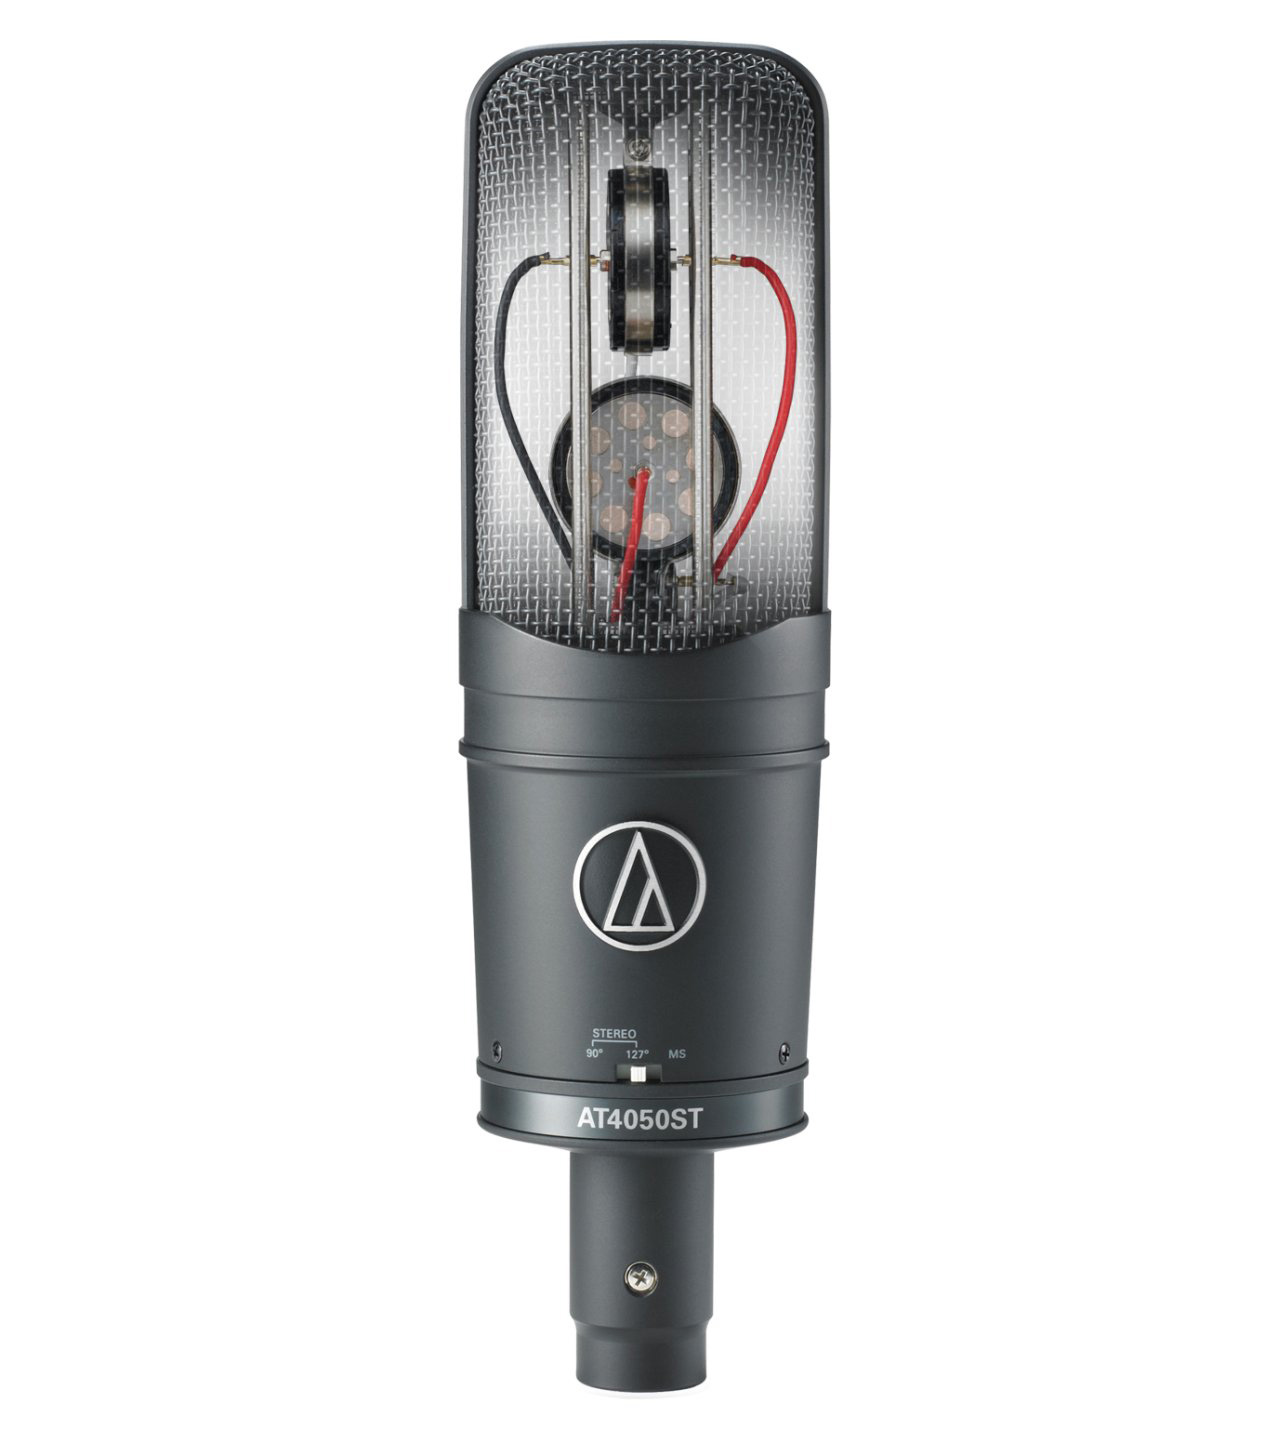 Audio Technica AT4050ST opened large diaphragm stereo microphone